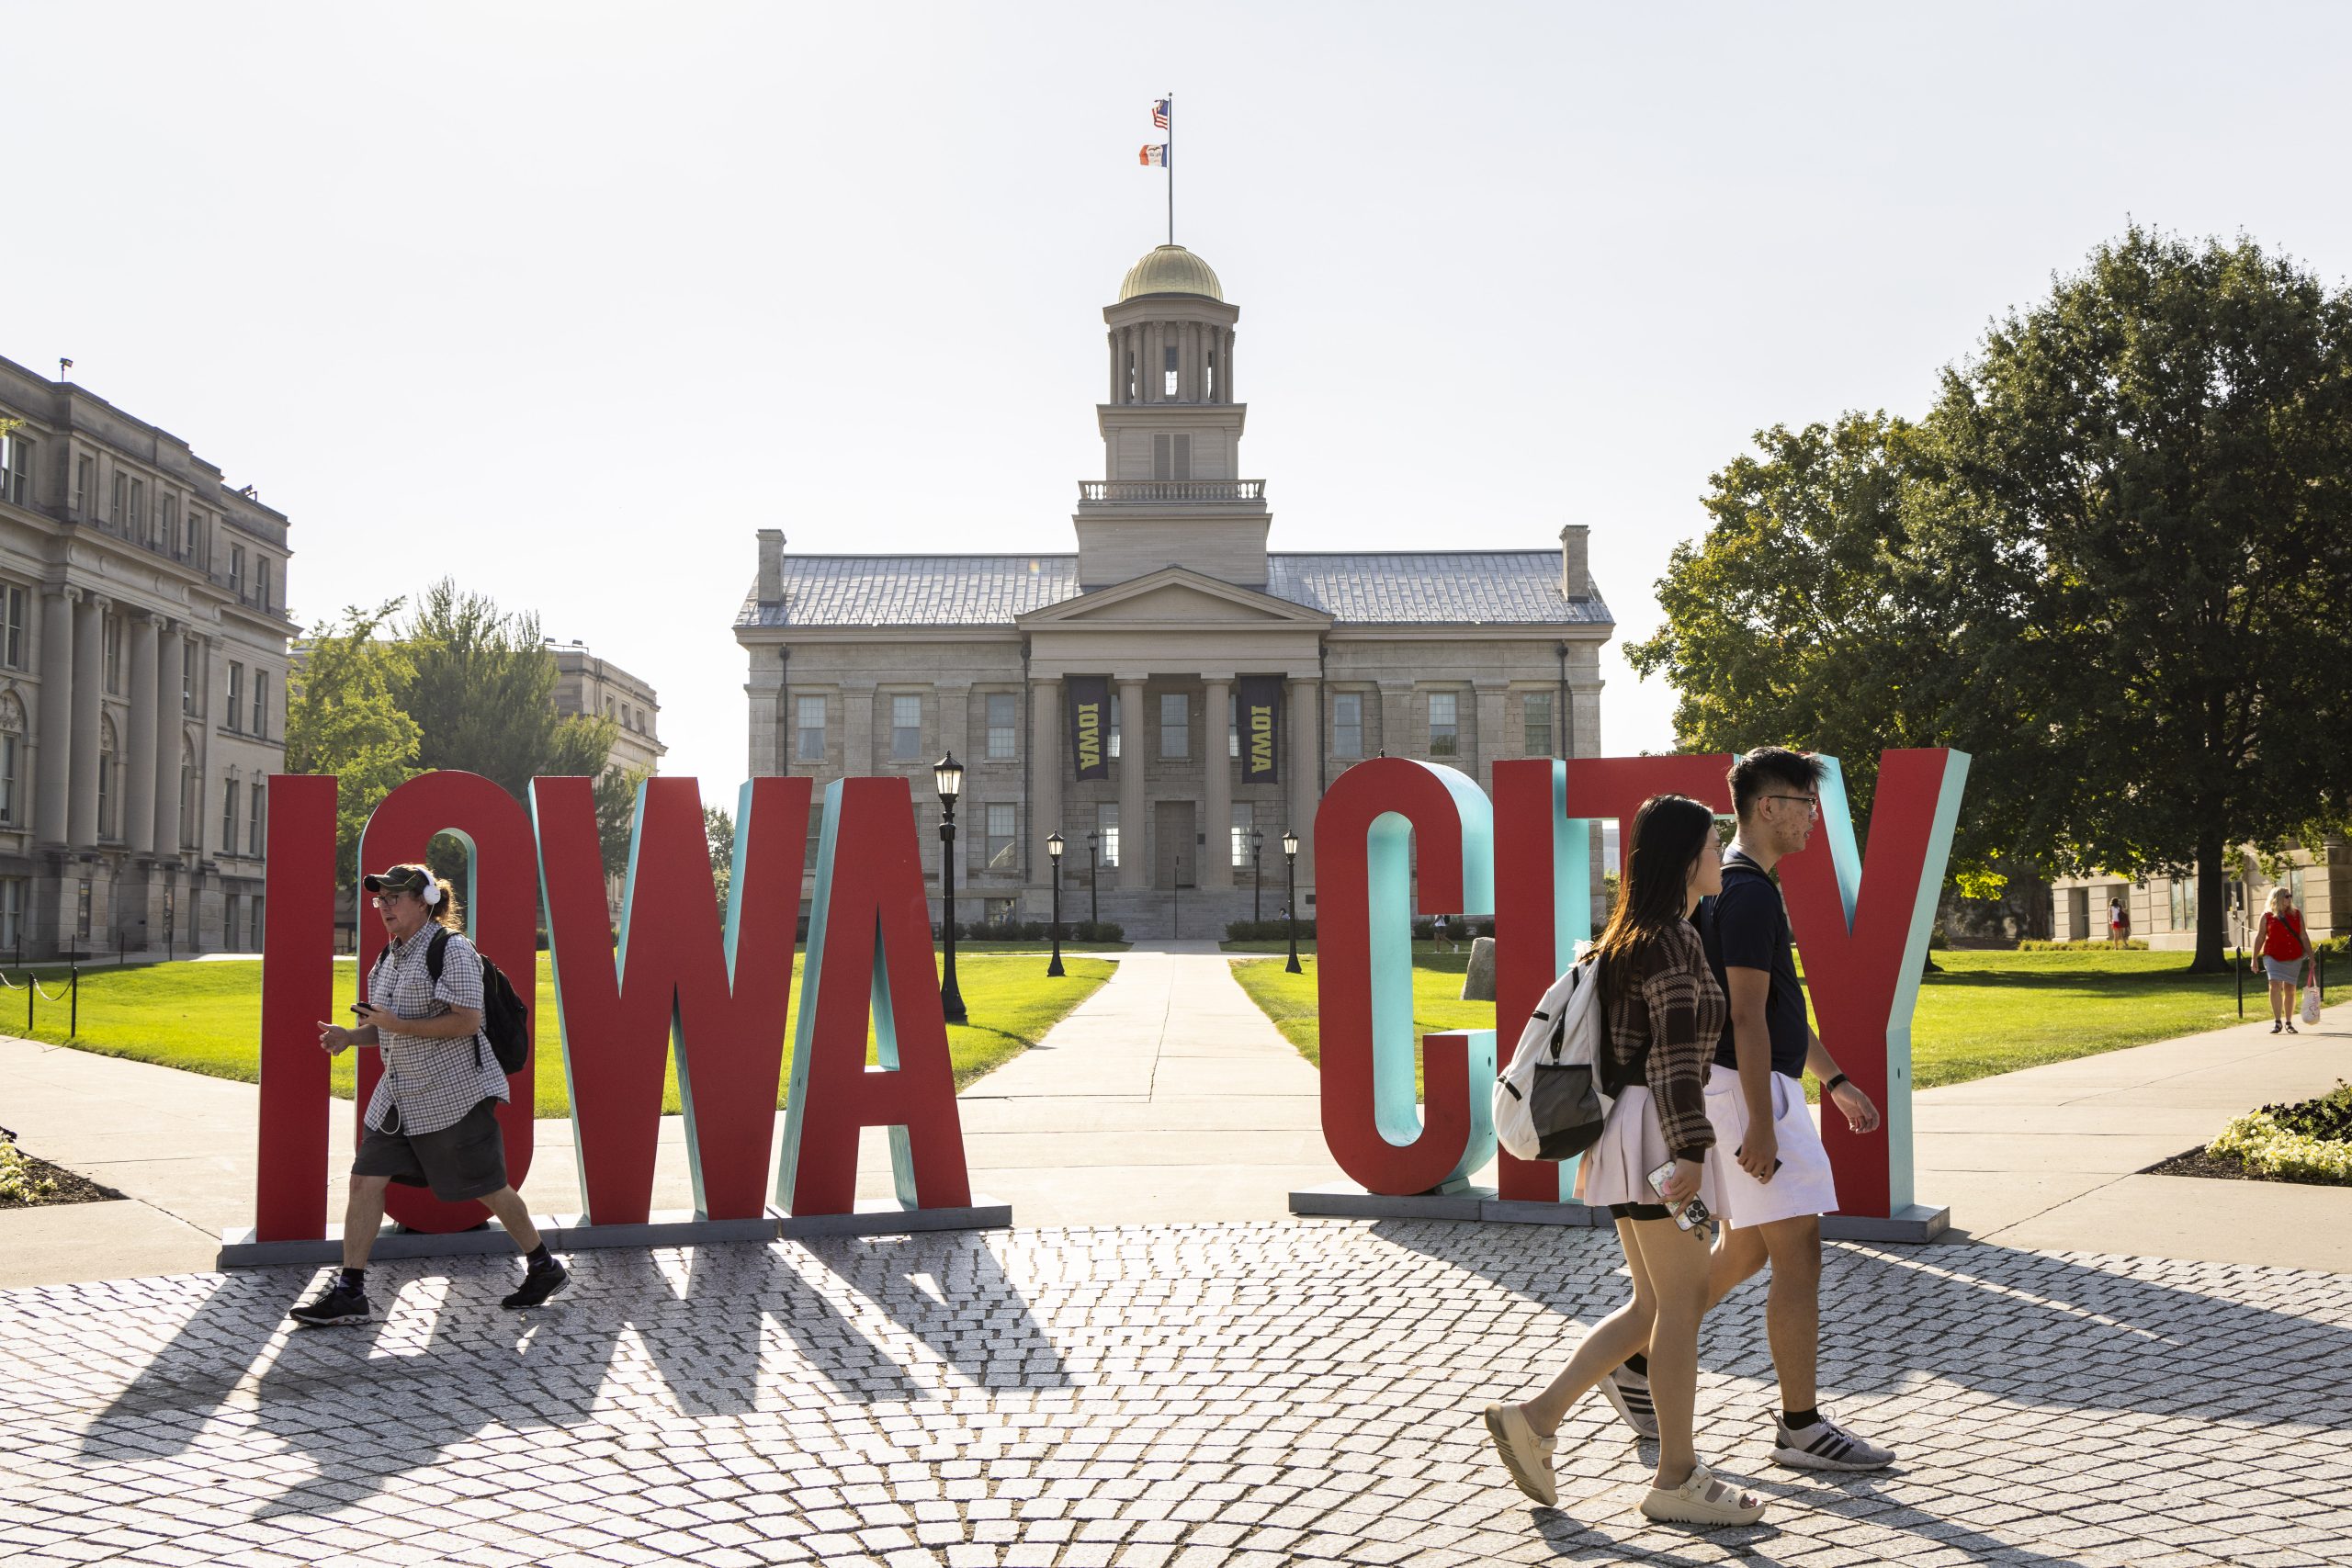 Plan Your Summer Vacation in the Iowa City Area